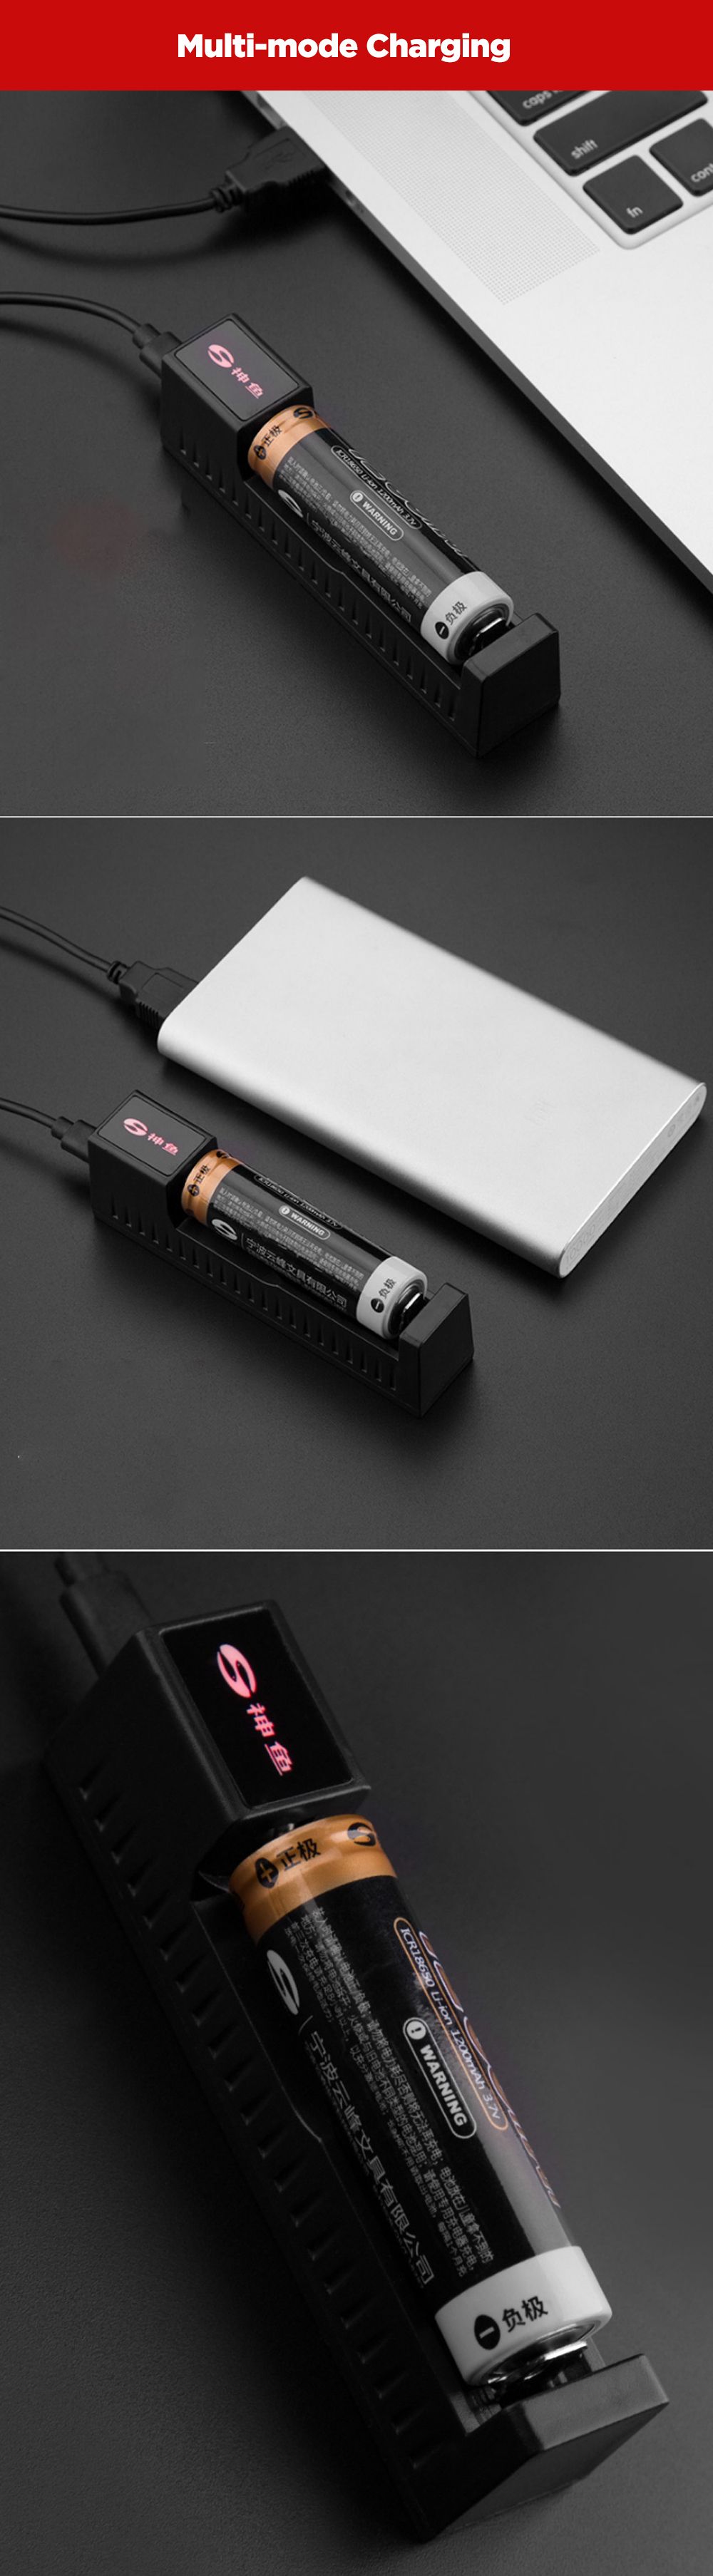 SHENYU-42V-1A-Intelligent-USB-Charging-Battery-Charger-1-Slot-Portable-Mini-Battery-Charger-For-1865-1759879